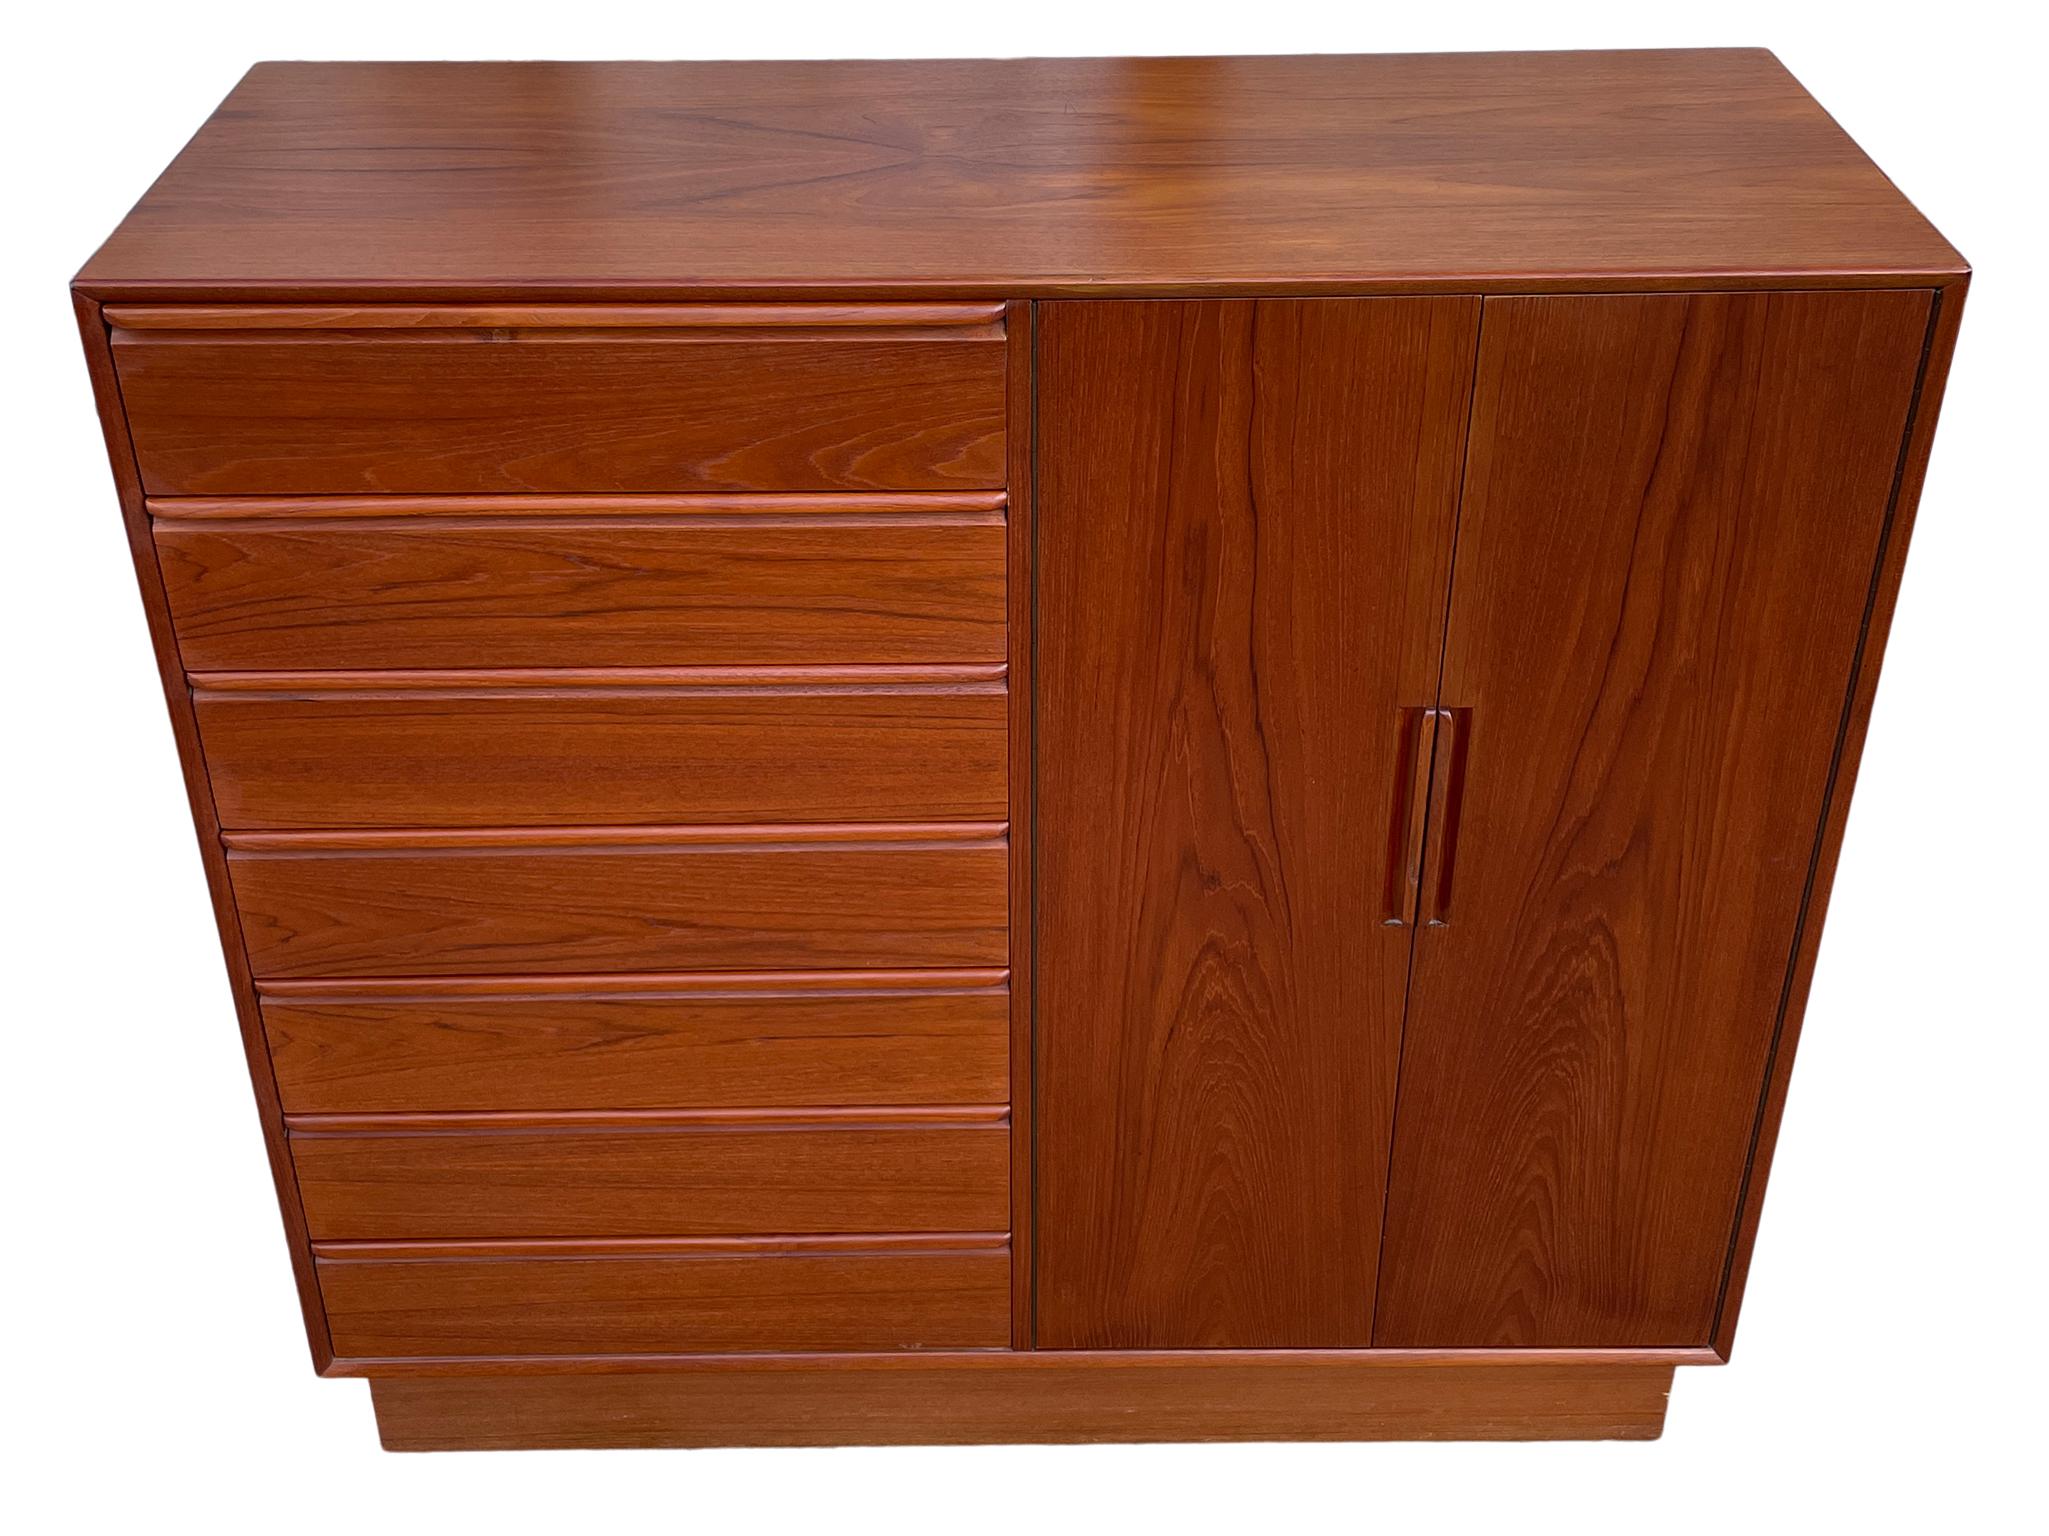 Beautiful mid-century Norwegian modern teak 14-drawer tall dresser Wardrobe by Westnofa. Great design and great vintage condition - clean inside and out. Drawers slide smooth with dovetail construction and carved handles with 2 cabinet doors.